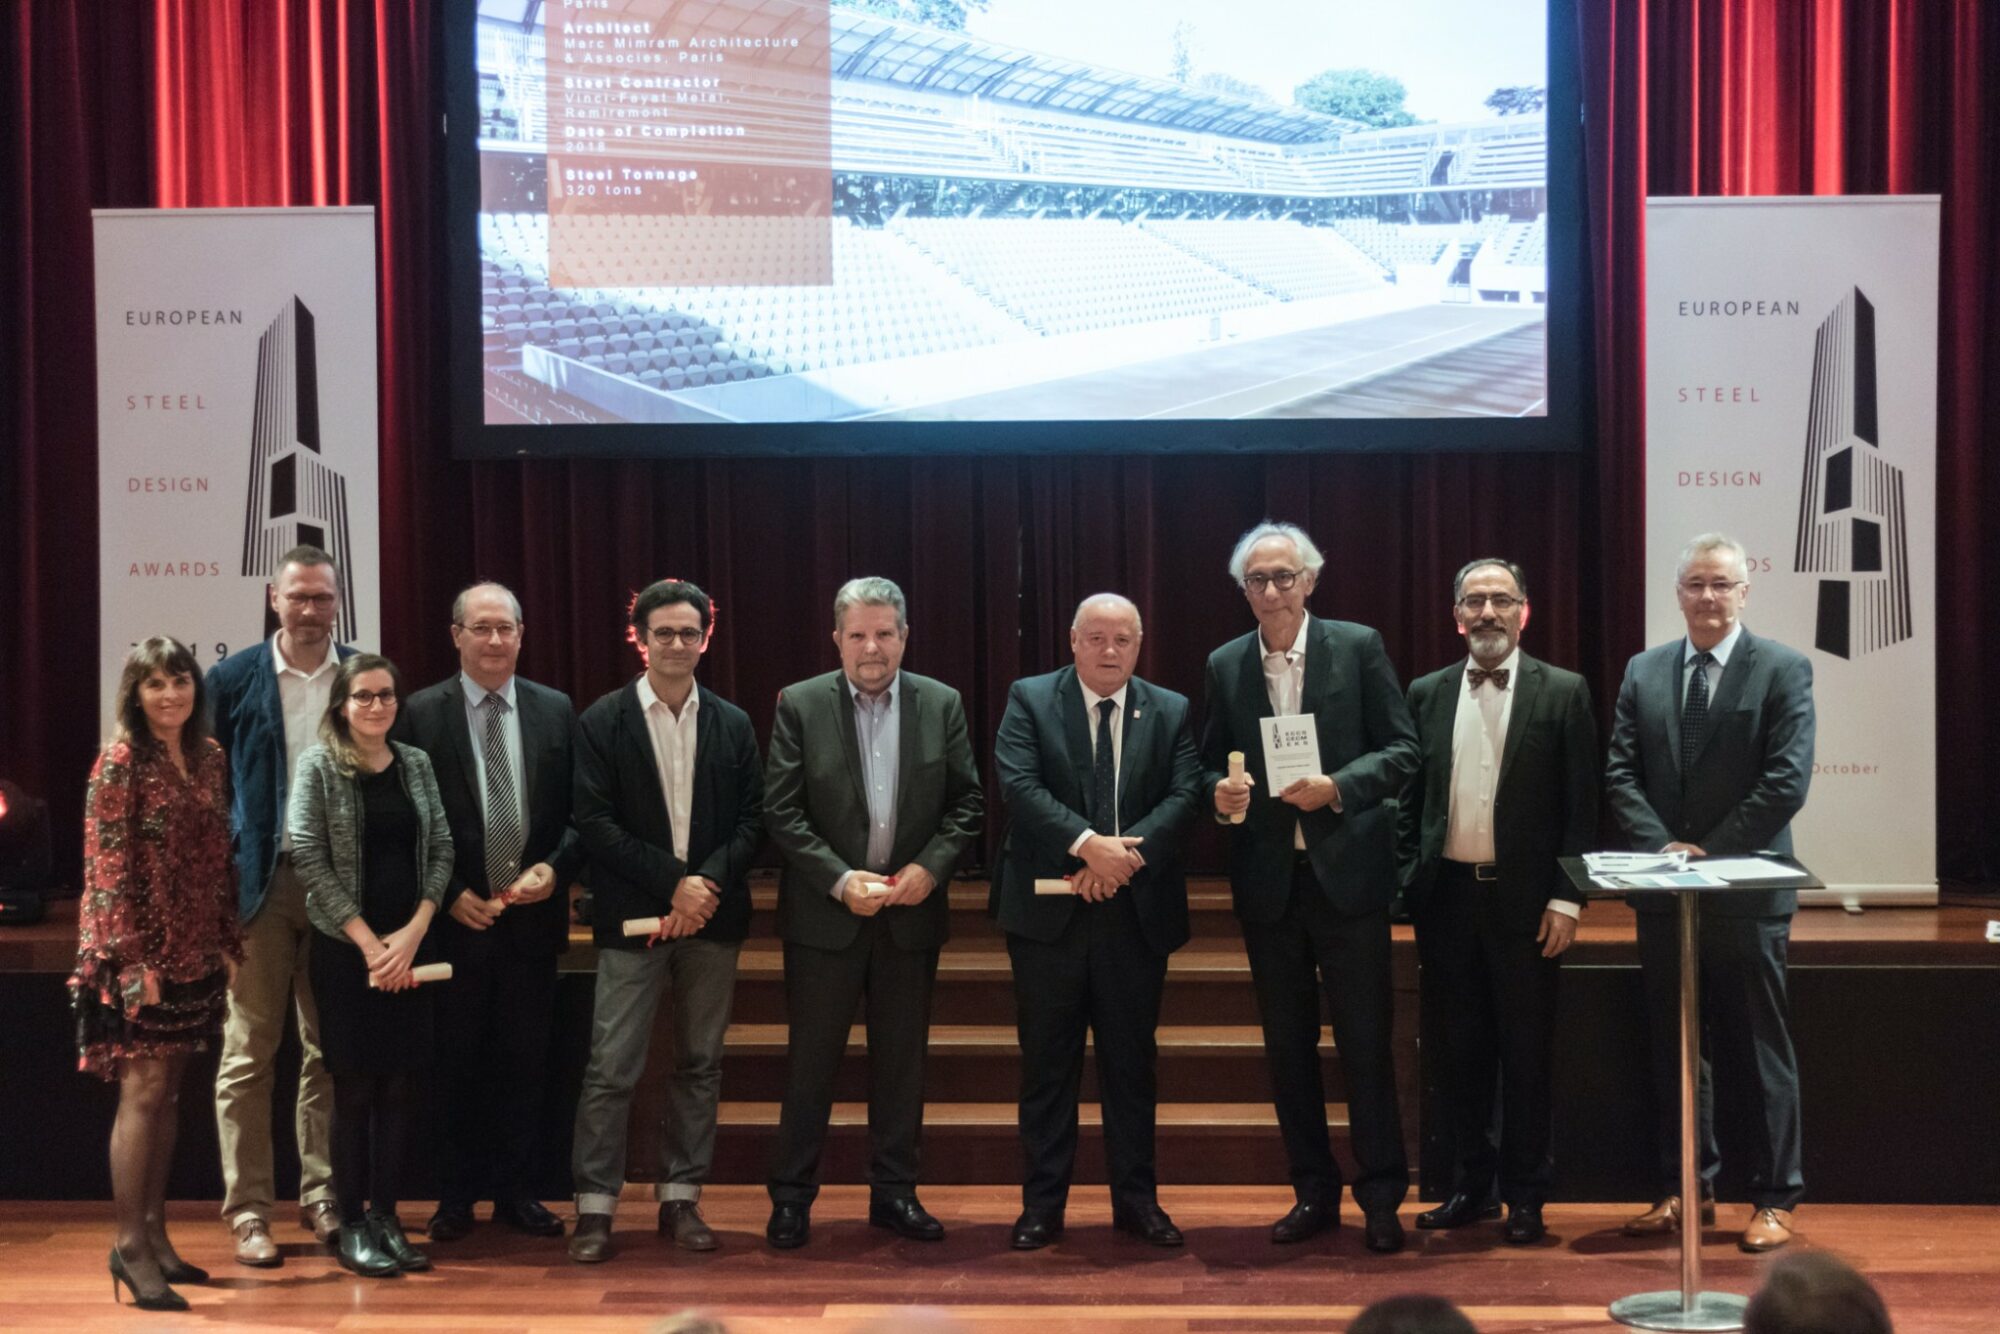 The FFT awarded for the realization of Court Simonne-Mathieu during the ceremony of the "European Steel Design Awards 2019" in Brussels